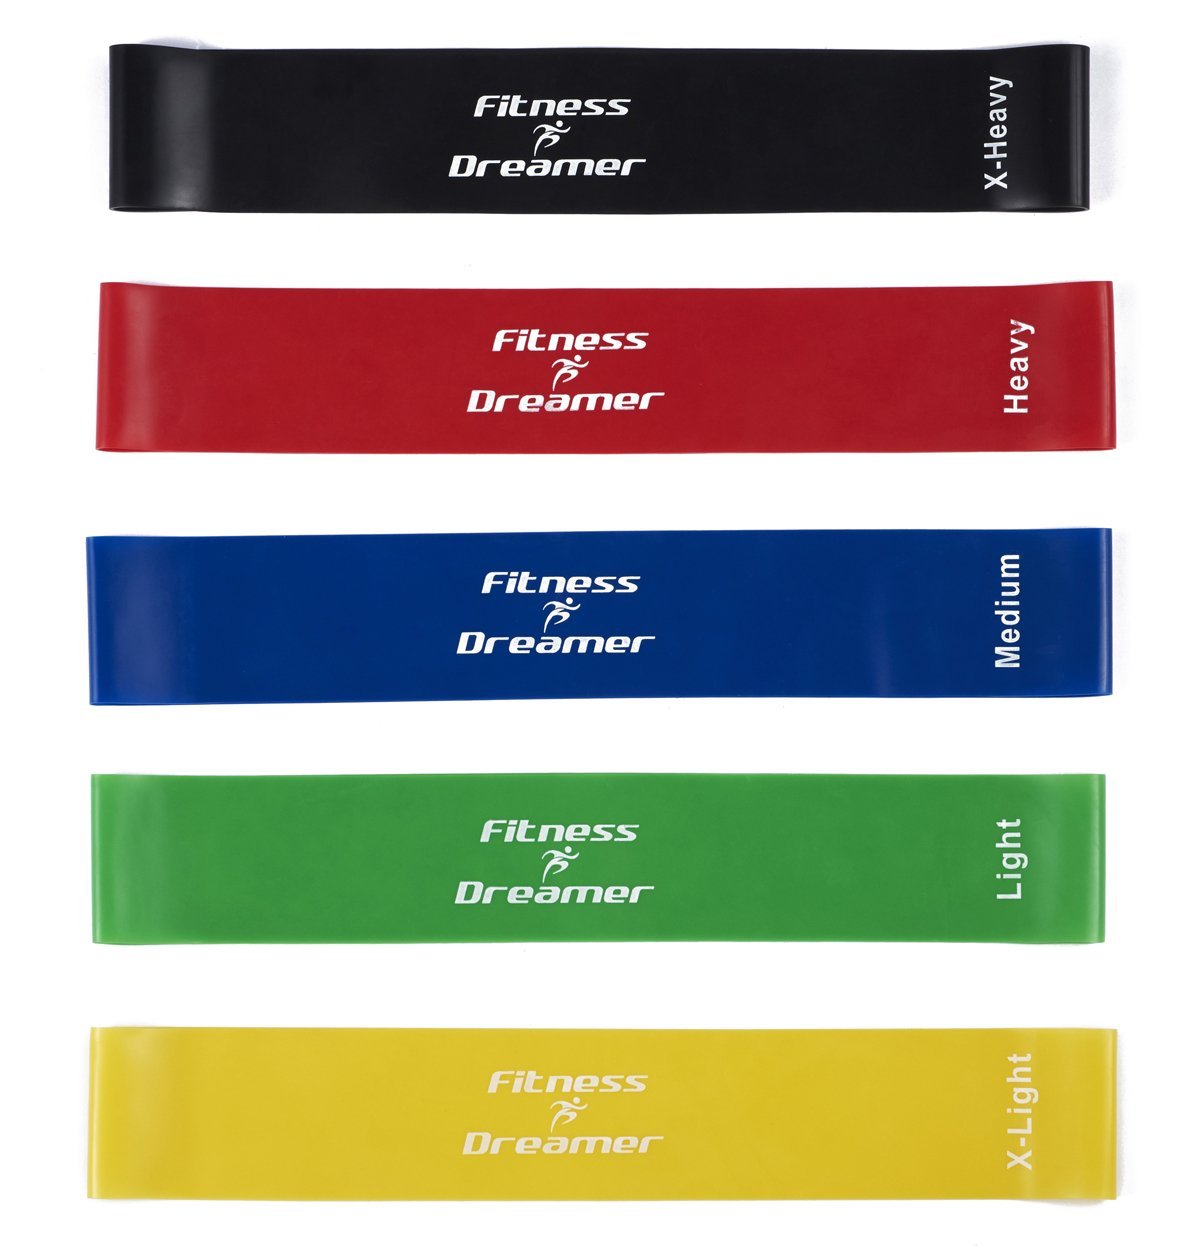 Fitness Dreamer Resistance Bands, Exercise Loop bands and Workout Bands by Set of 5, 12-inch Fitness Bands for Training or Physical Therapy-Improve Mobility and Strength, Life Time Warranty - image 5 of 7